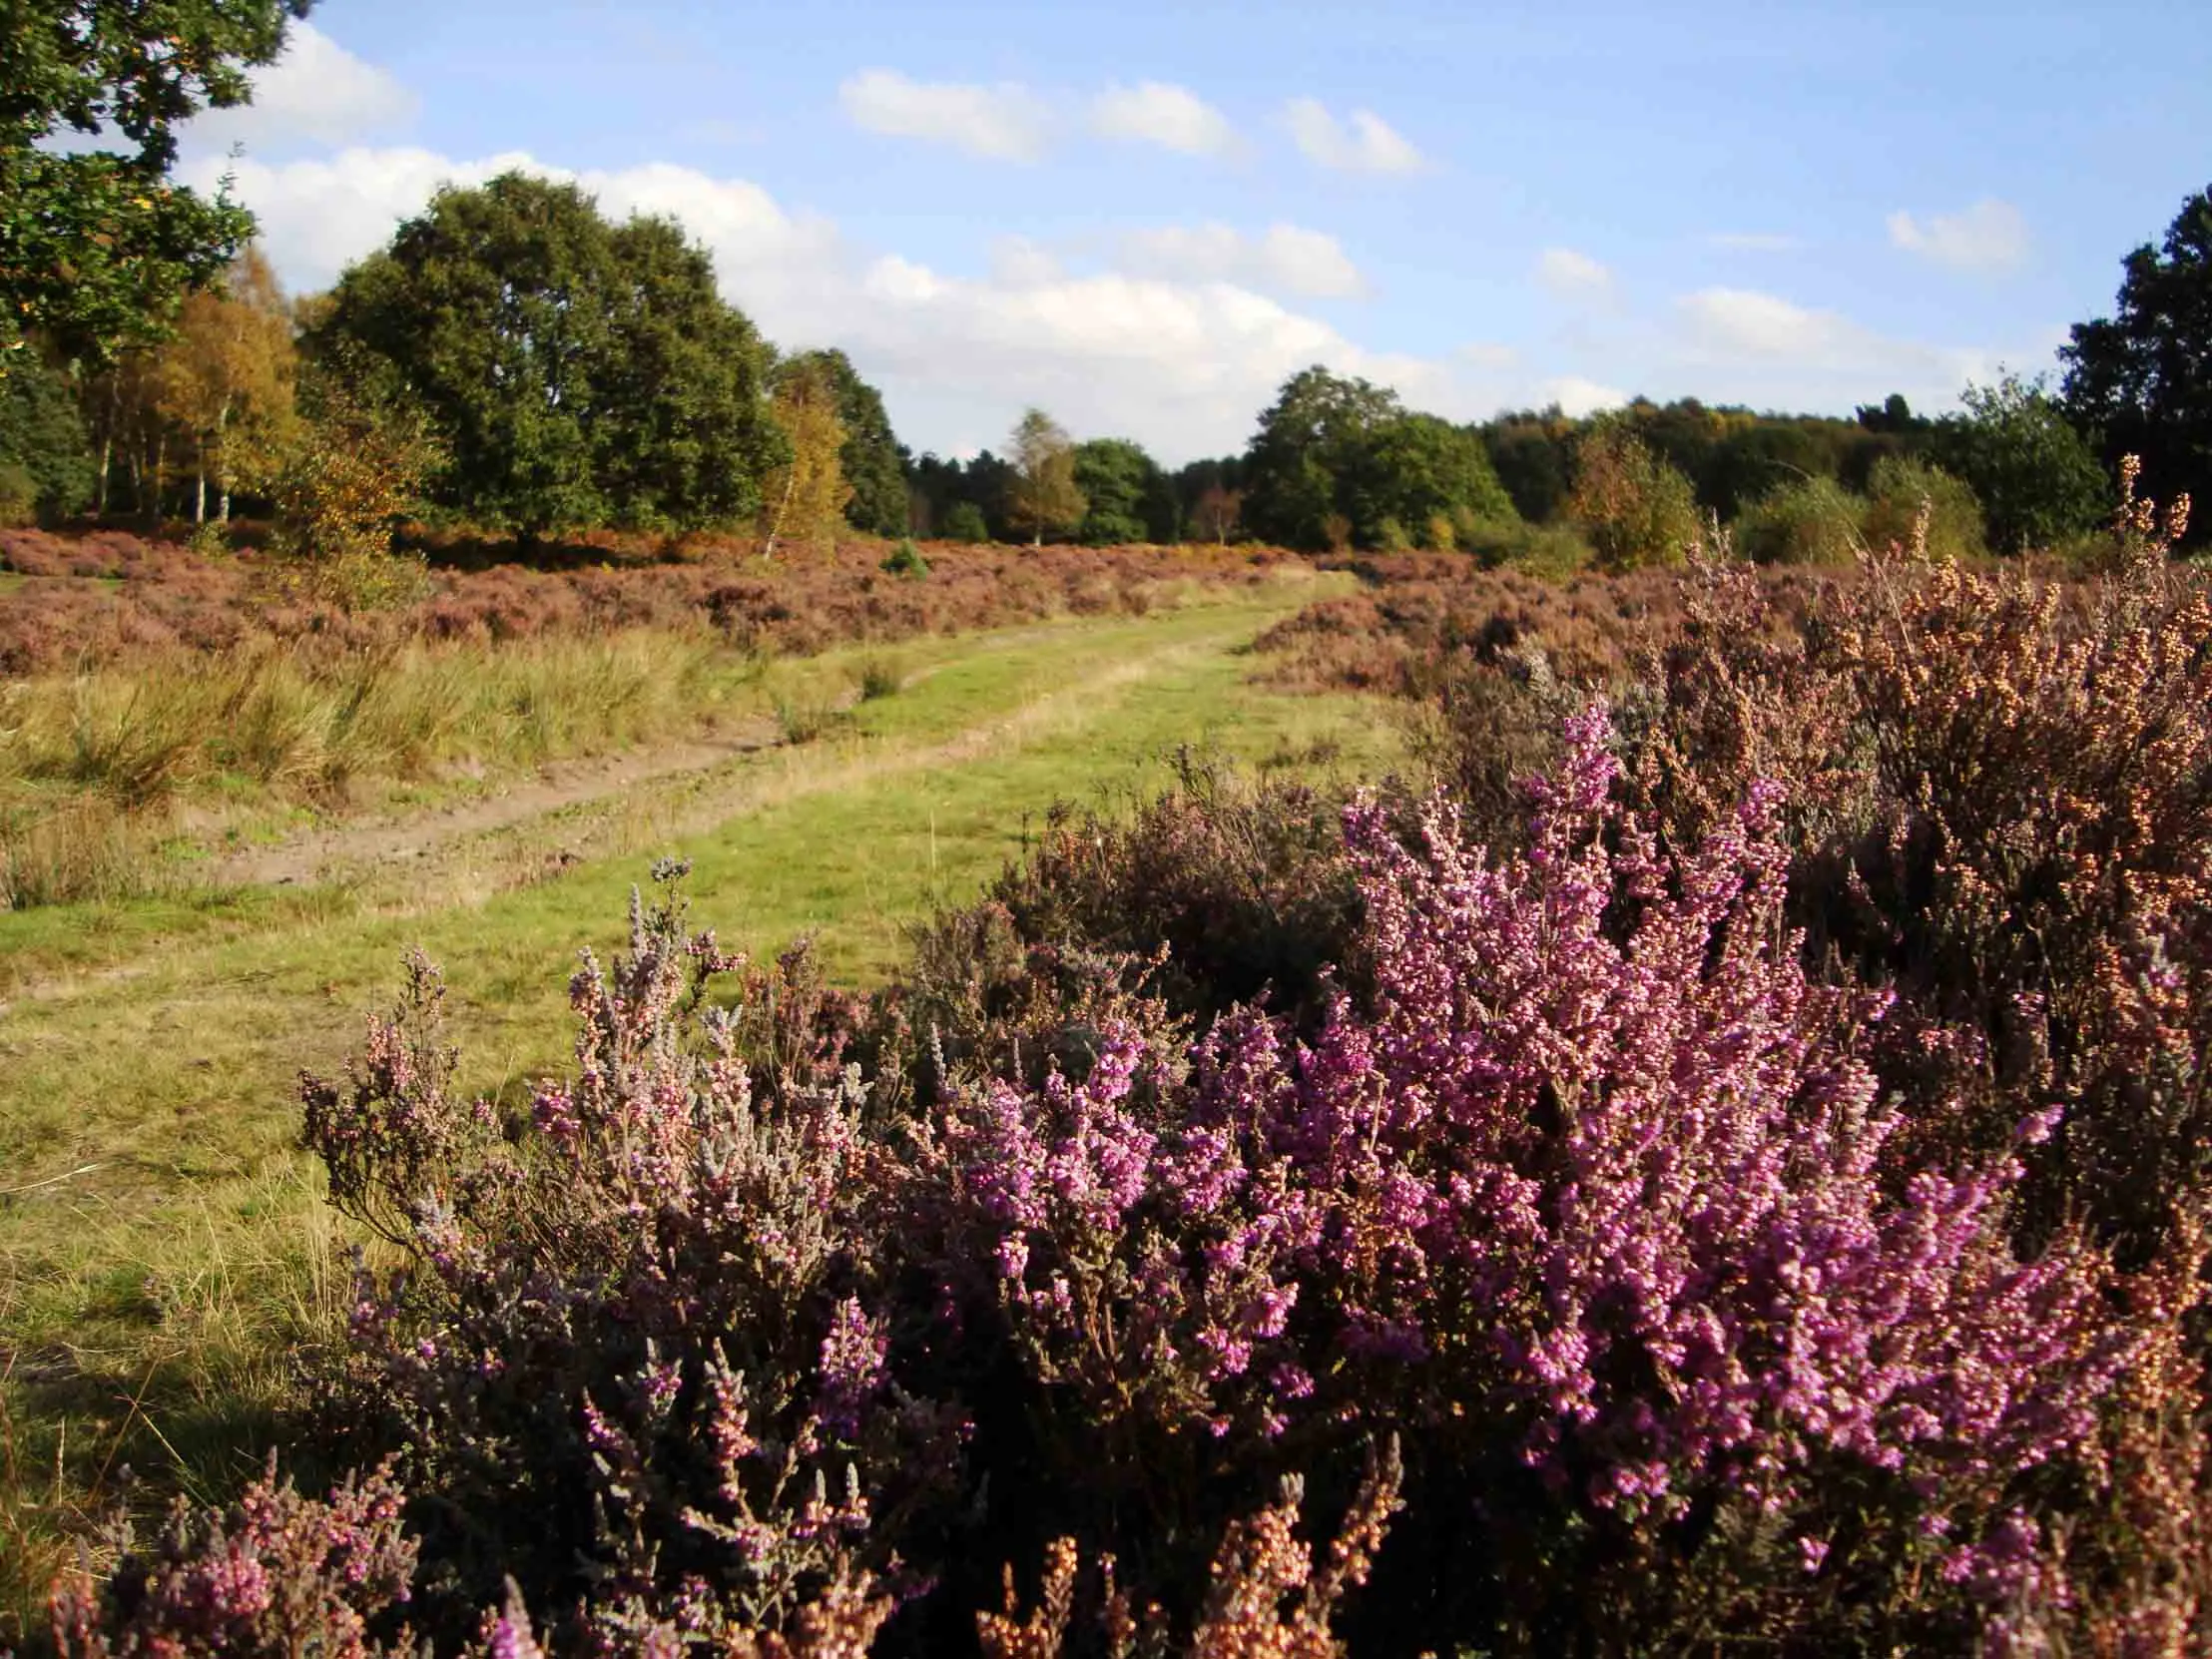 A dirt track runs through the heathland at Budby South, with deep purple Heather growing alongside.